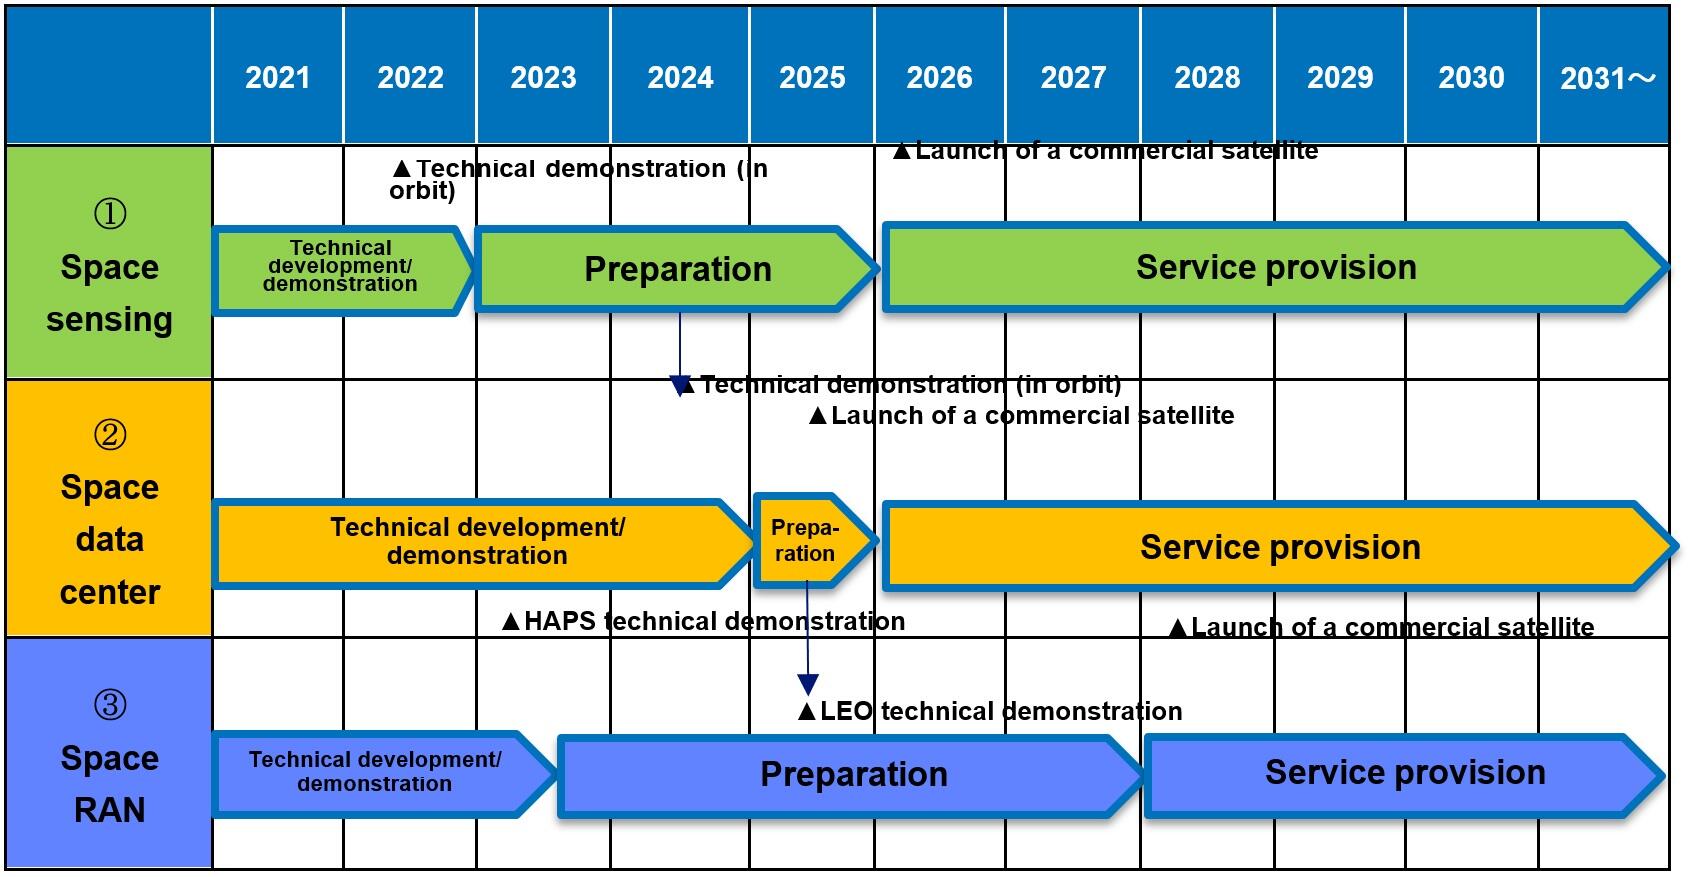 Fig. 3: Assumed schedule for service provision